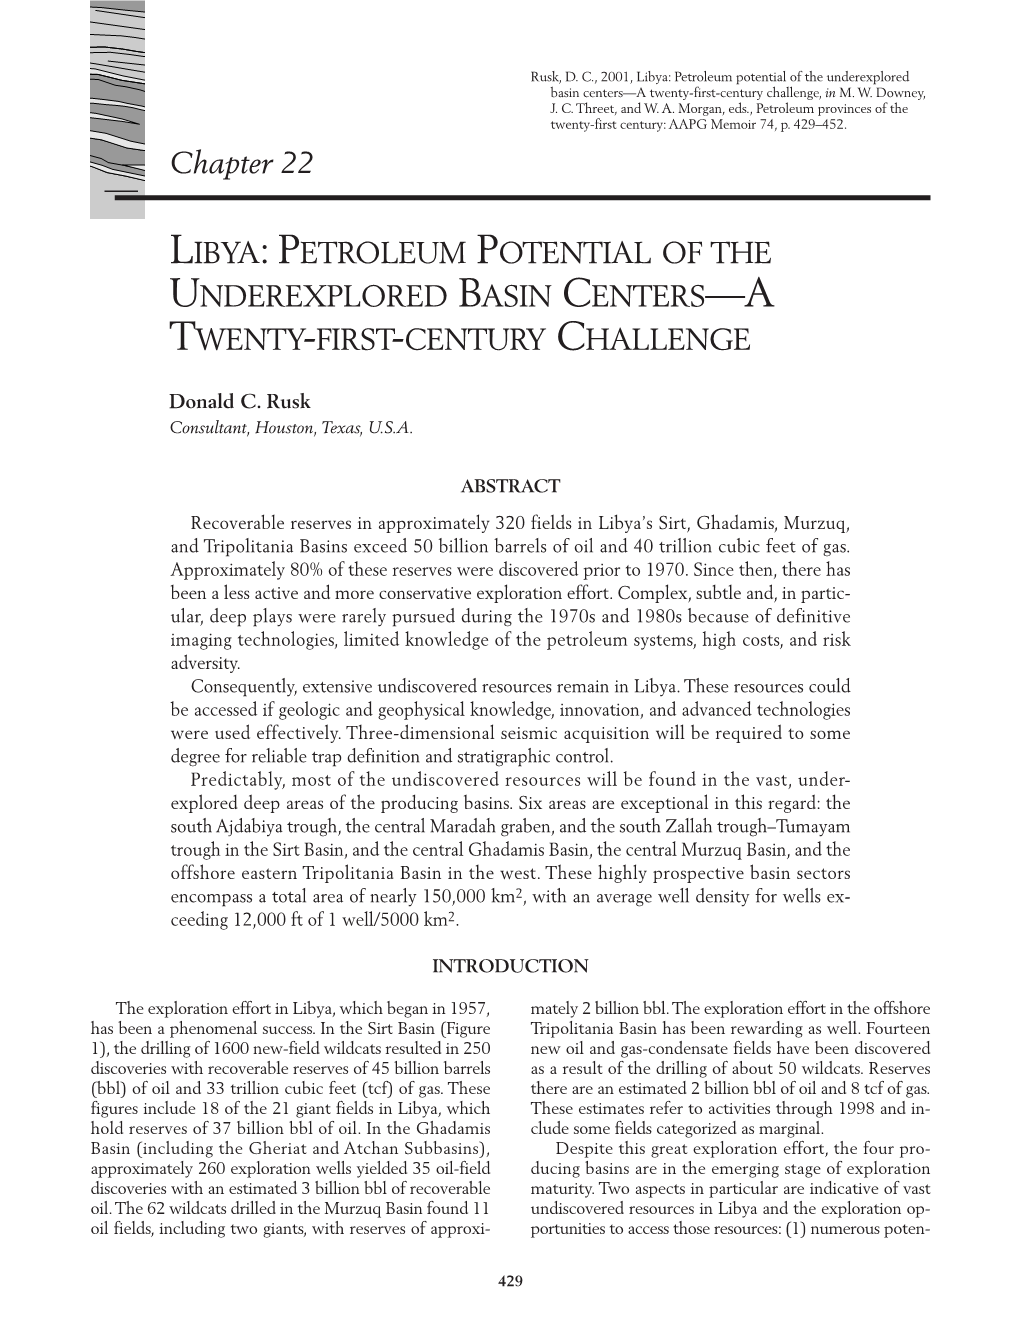 Chapter 22 LIBYA:PETROLEUM POTENTIAL of THE